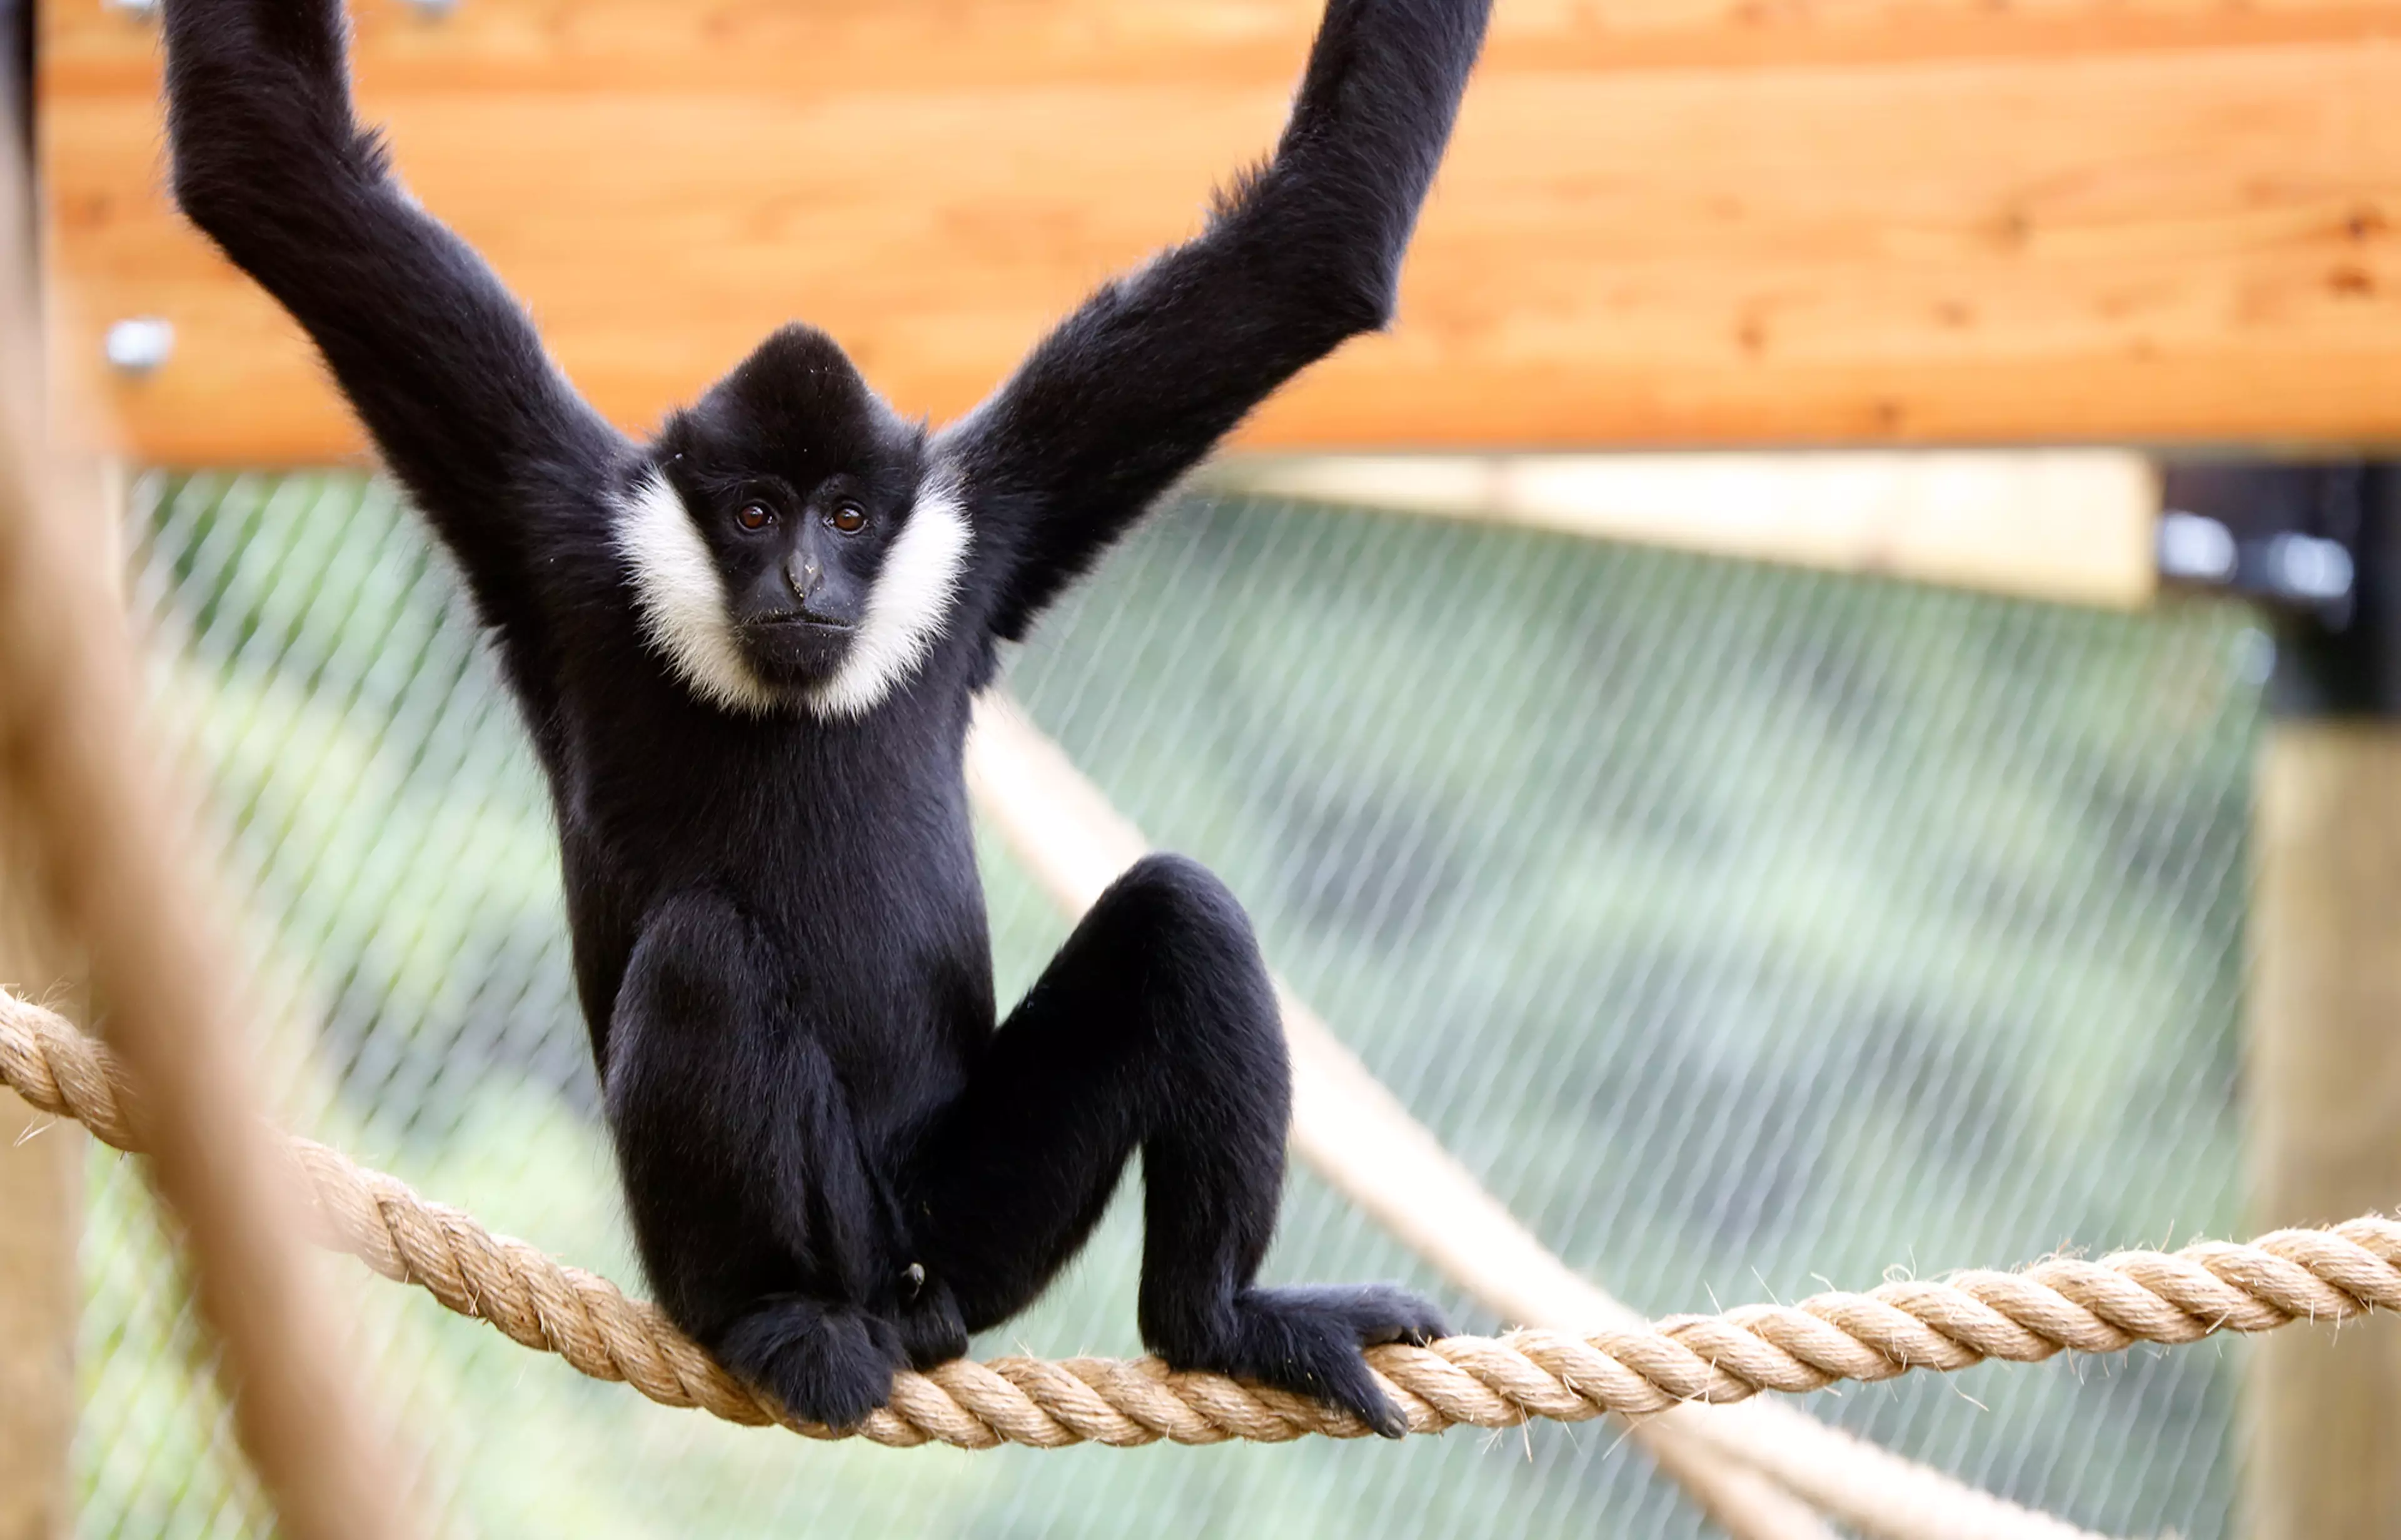 The poor gibbon is missing social interaction (